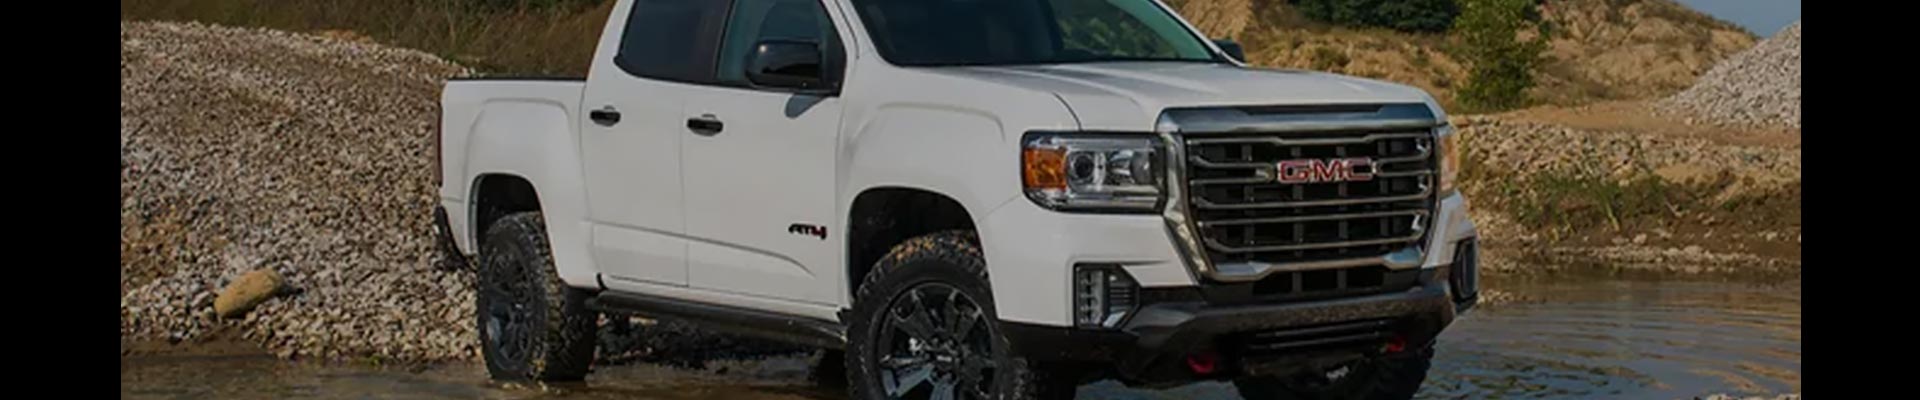 Shop Replacement and OEM GMC Jimmy Parts with Discounted Price on the Net